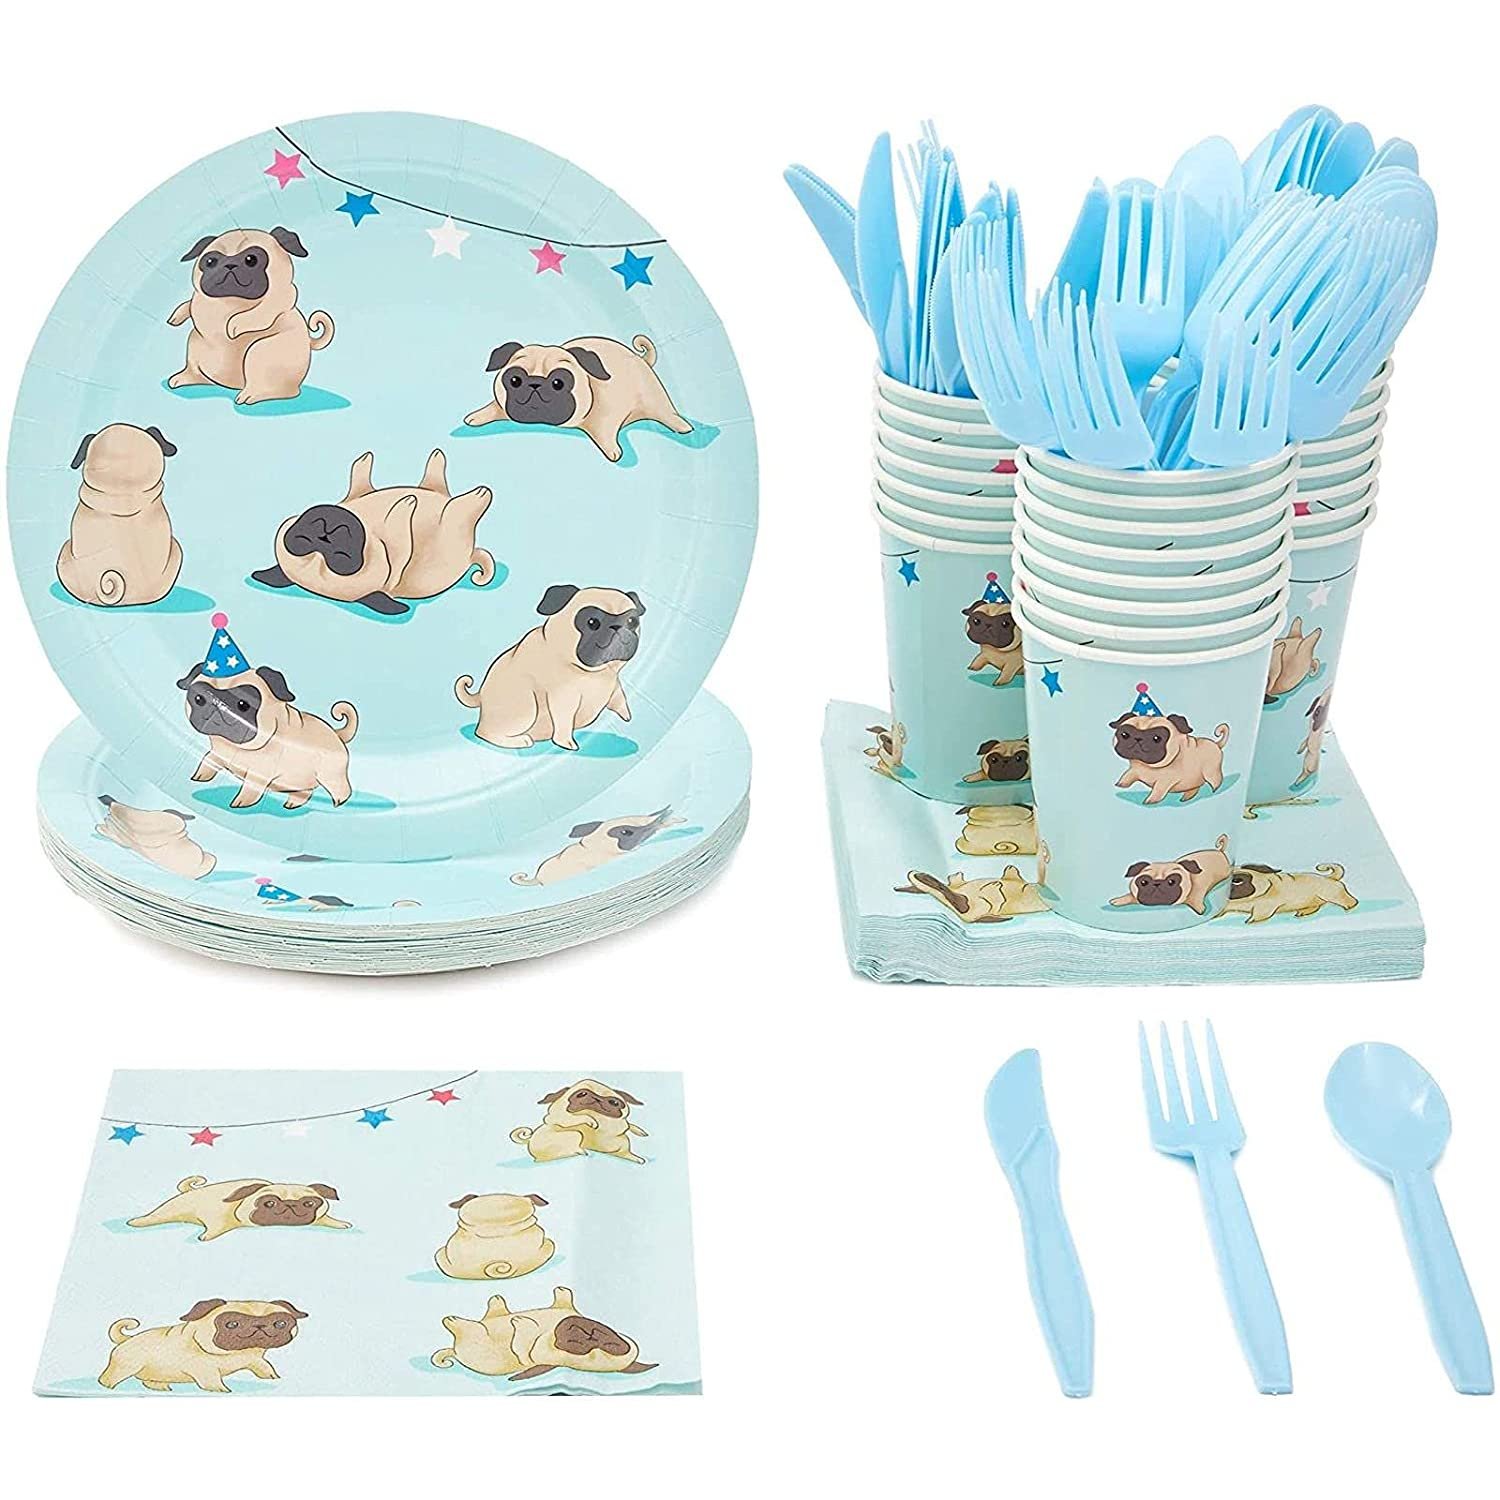 Pug Party Supplies, Dog Birthday Decorations, Paper Plates, Napkins, Cups, Cutlery (24 Gu